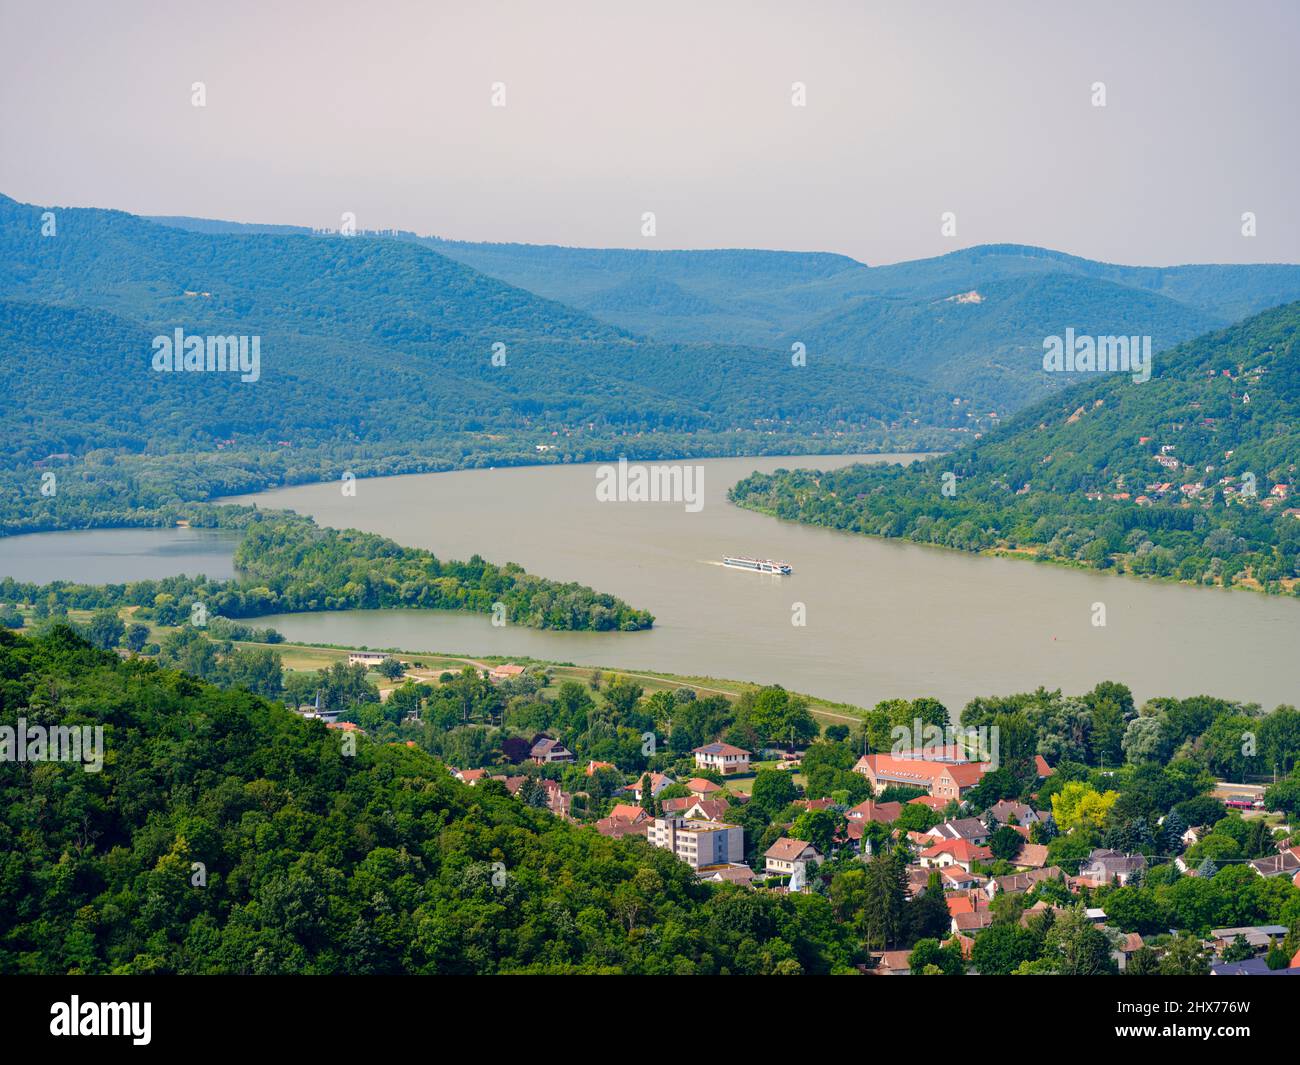 The Danube Bend near Visegrad, left the Pilis Mountains, right the Western Carpathian Mountains Europe, East Eruope, Hungary Stock Photo